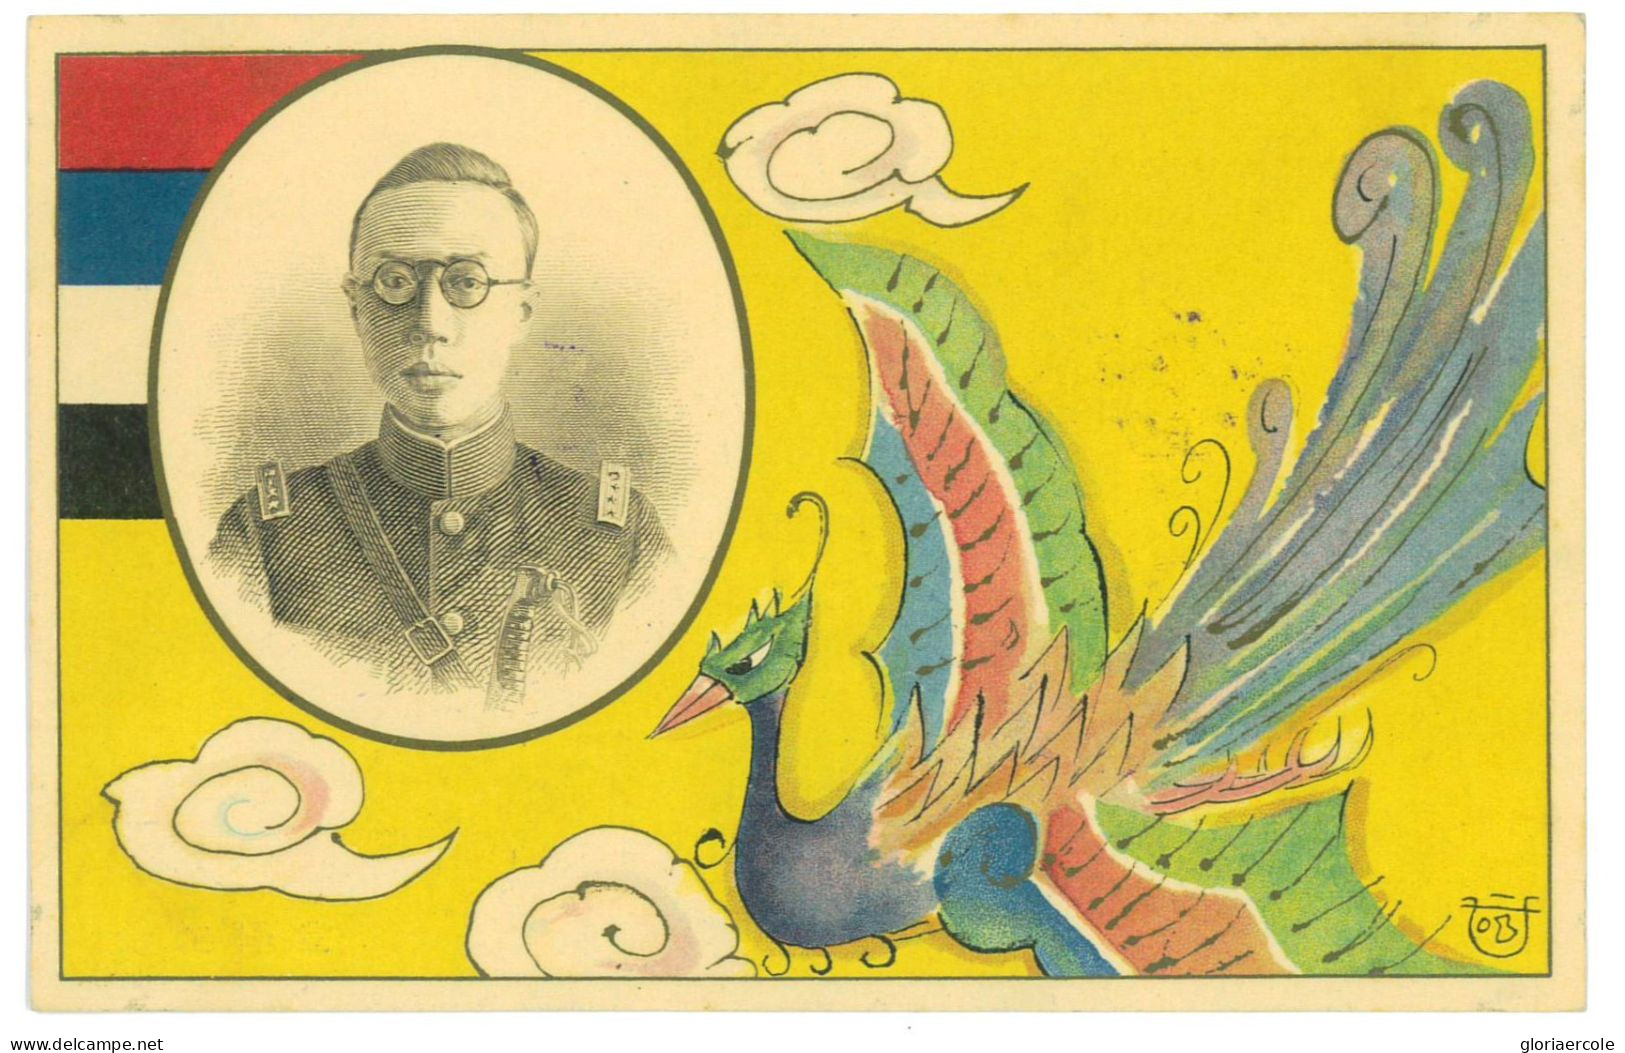 P2791 - CHINA/MANCHURIA MICHEL 23/26 WITH SPECIAL FDC CANCELLATION ON SPECIAL (BEAUTIFUL!!) POST CARD - 1932-45 Manchuria (Manchukuo)